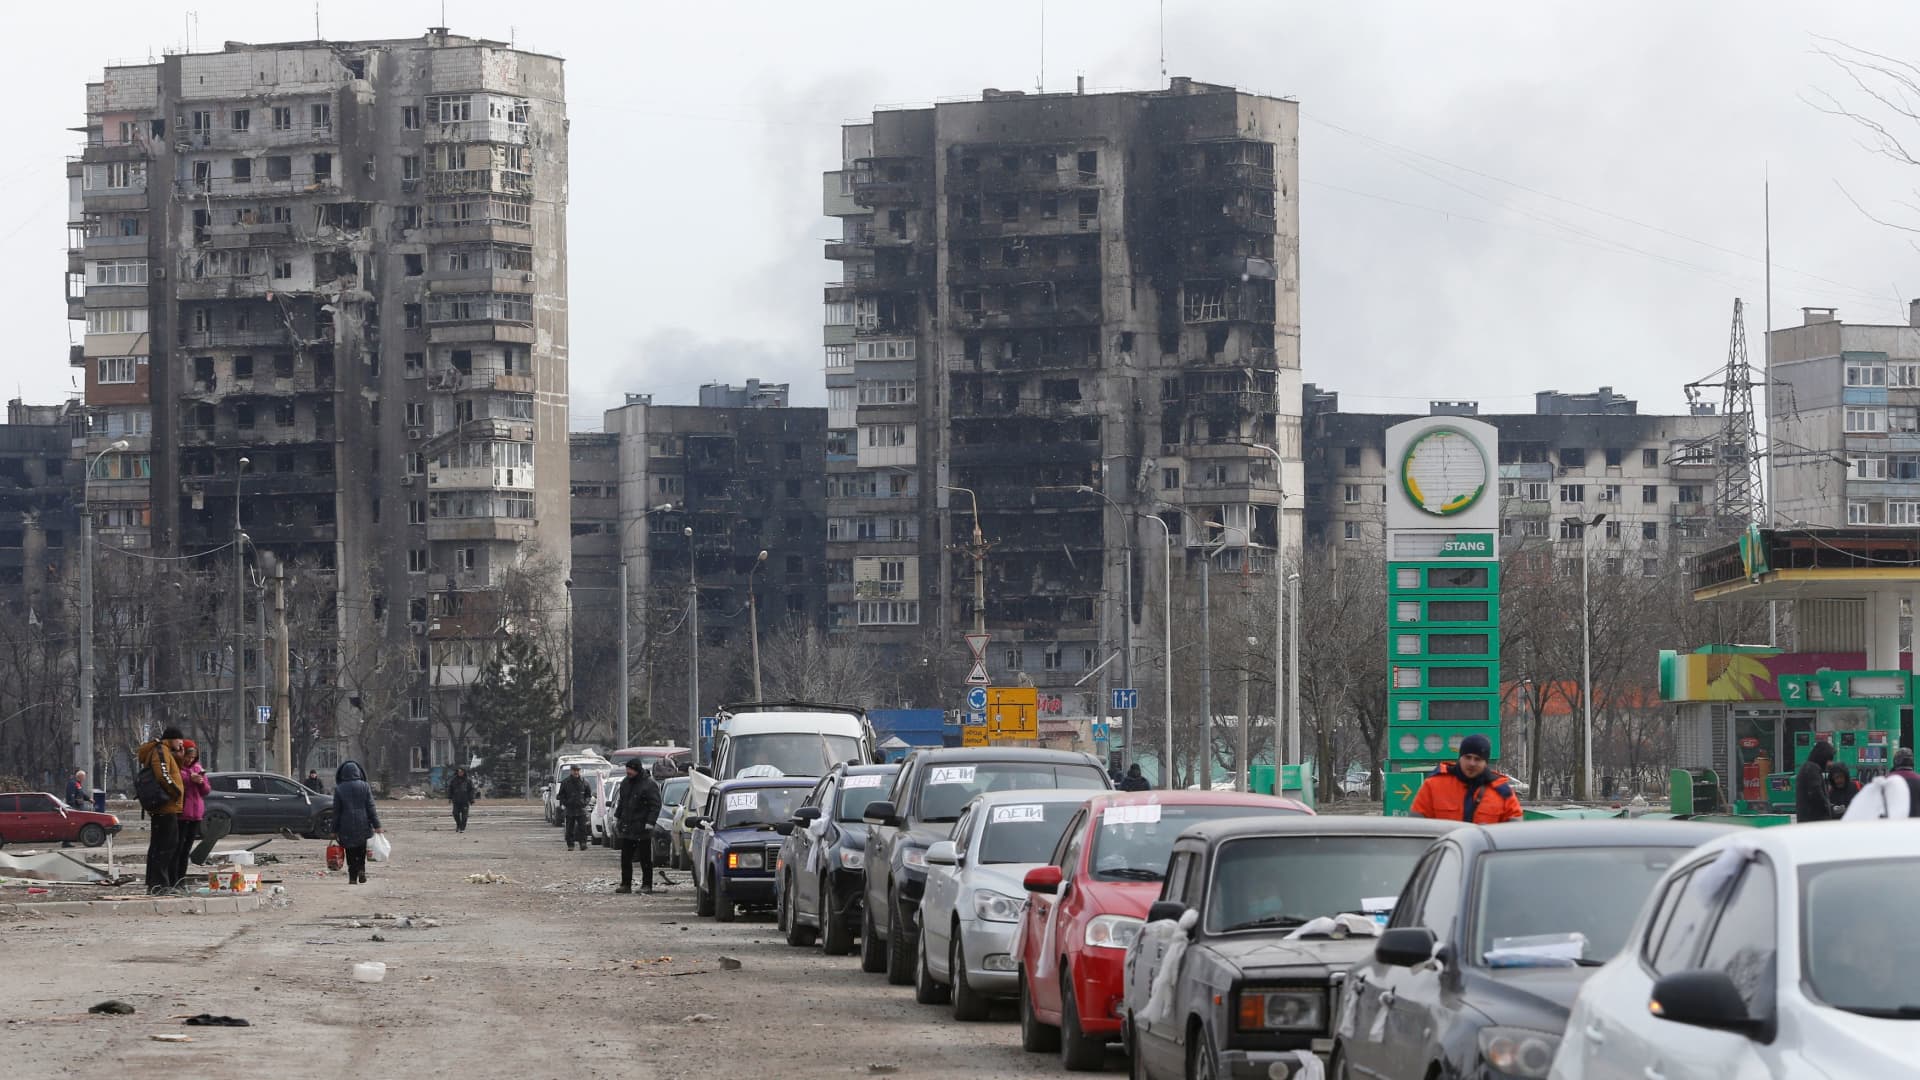 A view shows a line of cars near blocks of flats destroyed during Ukraine-Russia conflict, as evacuees leave the besieged port city of Mariupol, Ukraine March 17, 2022.